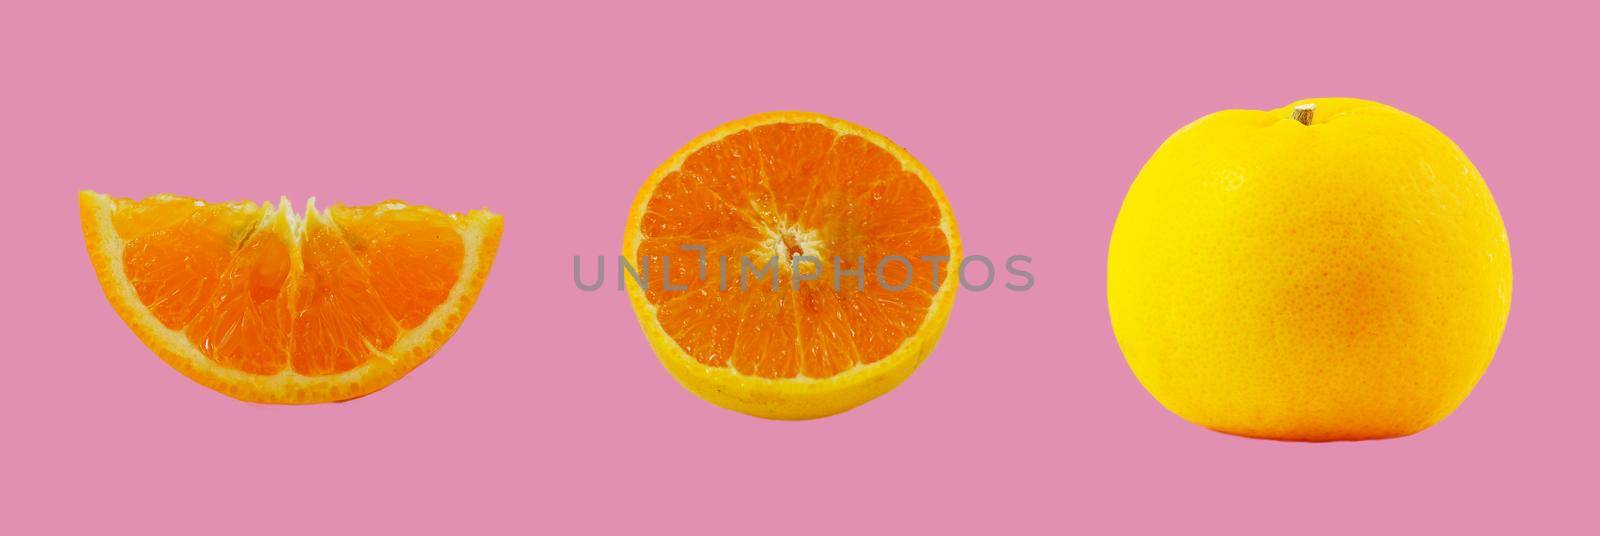 Orange fruit and orange halves
 Isolated on pink background Natural refreshing fruit concept containing Vitamin C. by noppha80